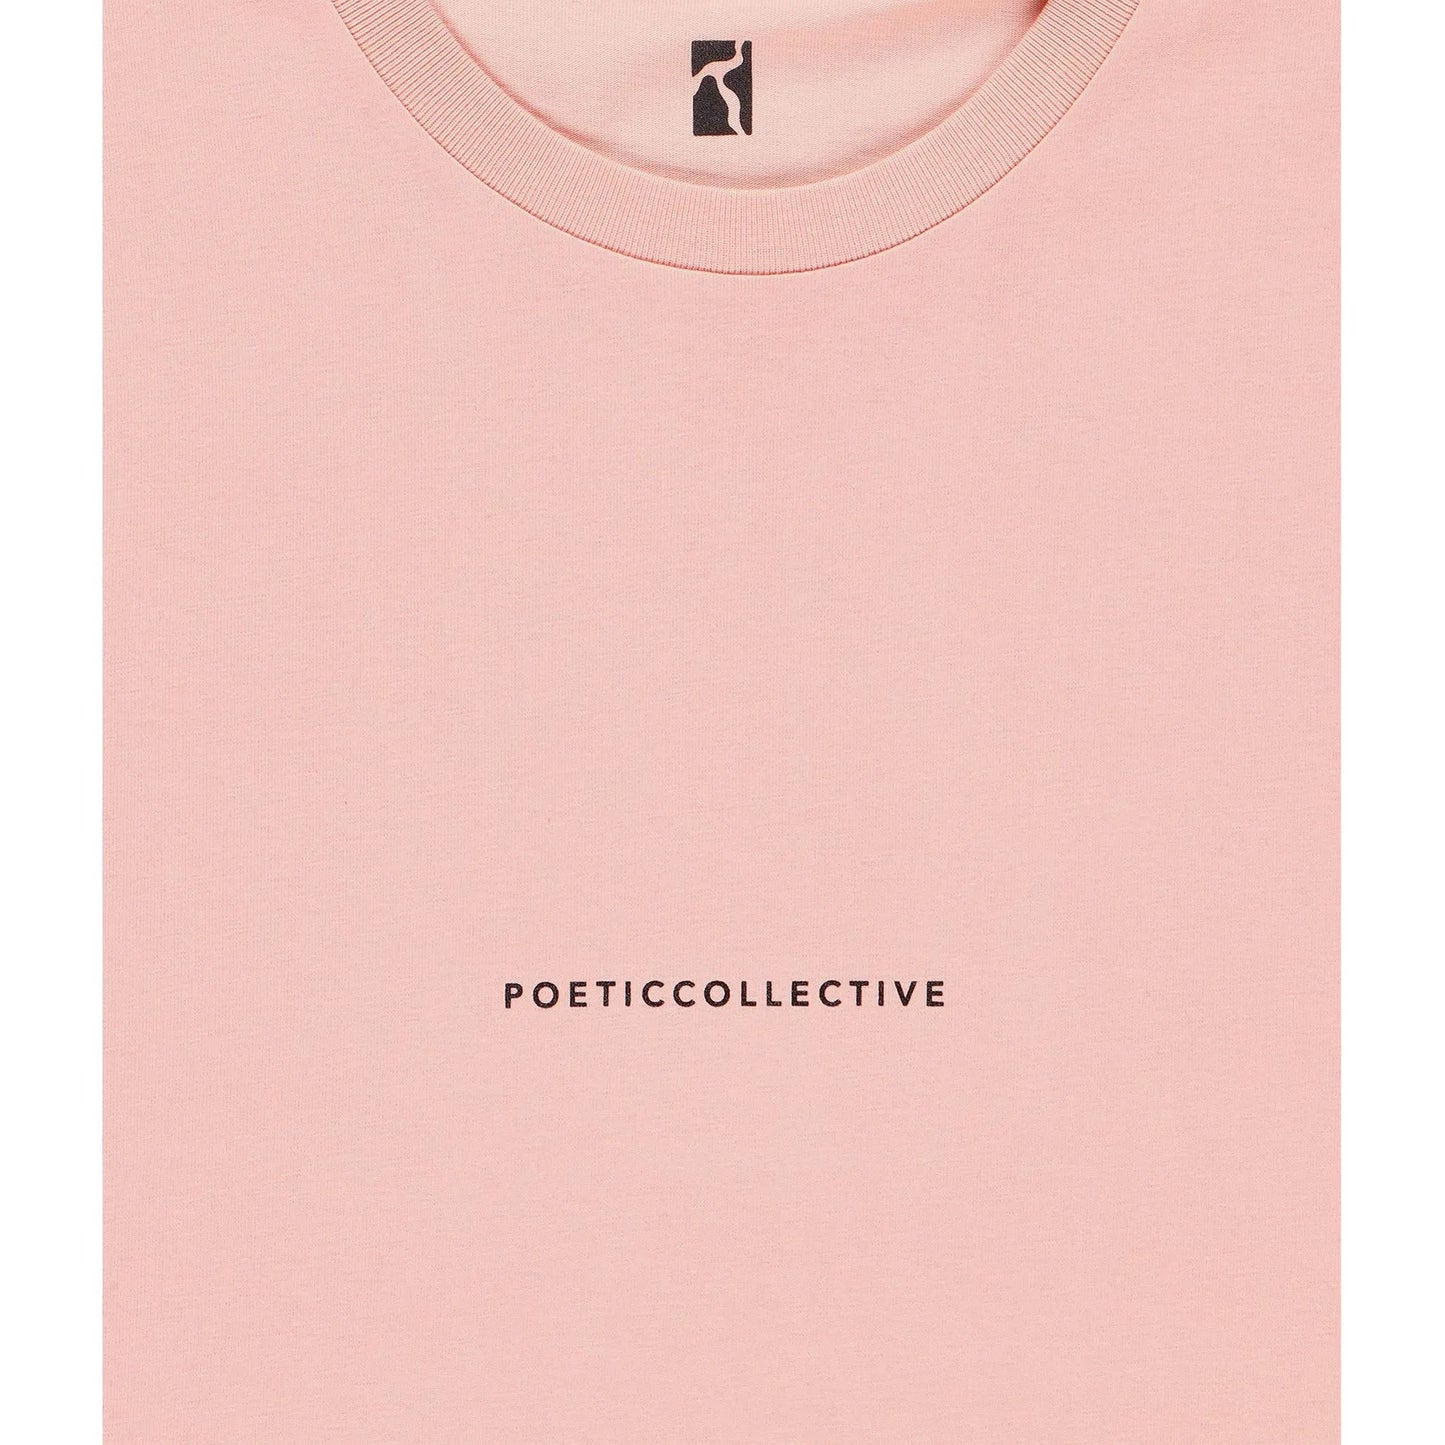 POETIC COLLECTIVE LOGO REPEAT PAINTING T-SHIRT CLAY